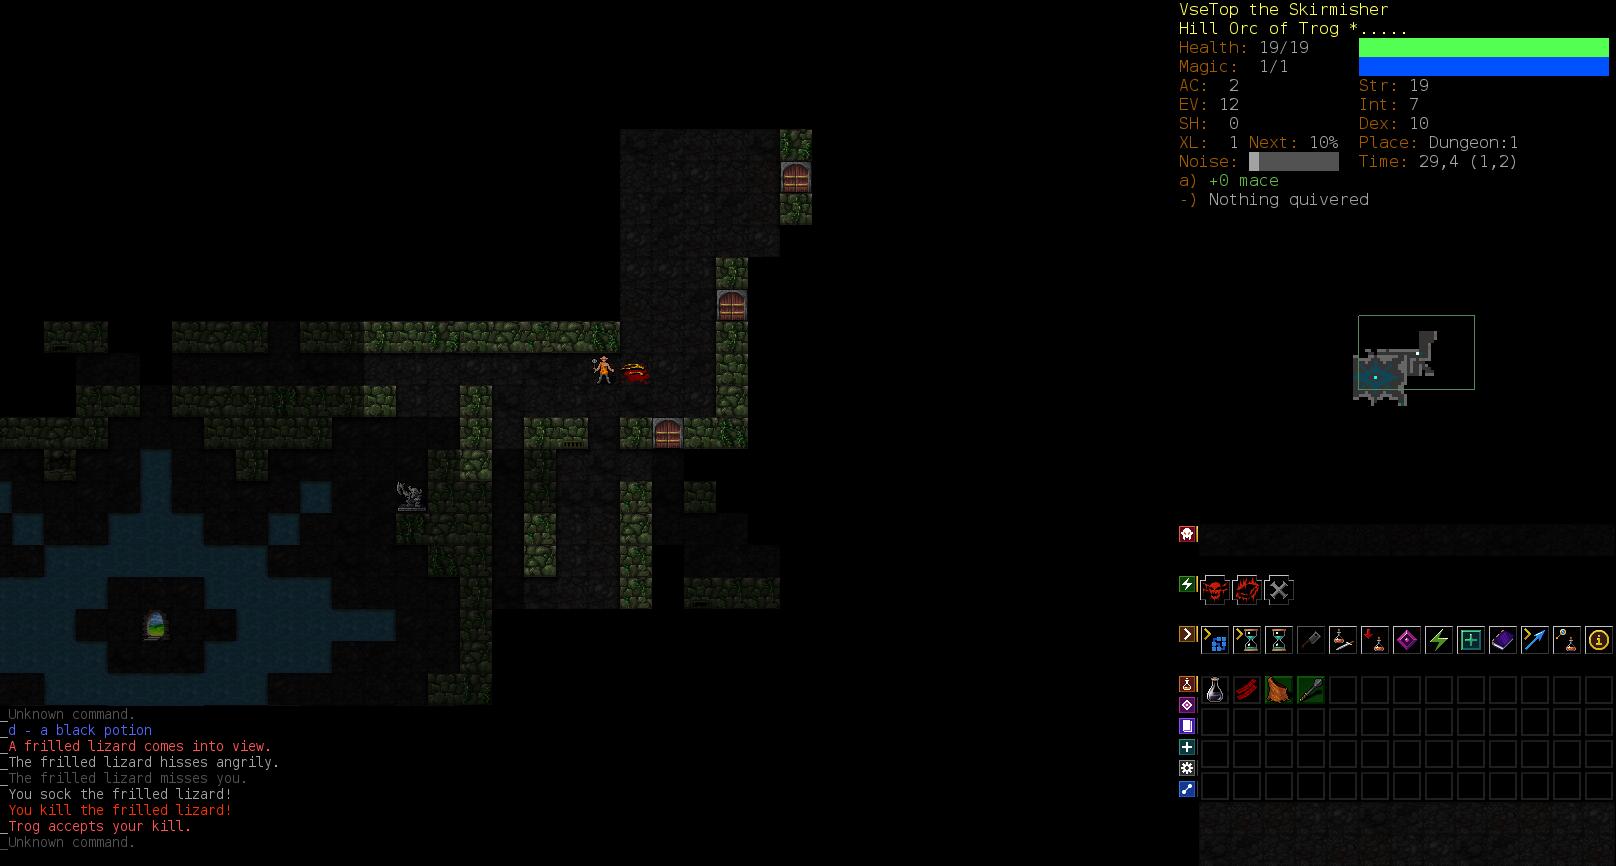 Dungeon soup. Dungeon Crawl (игра). Crawl Roguelike. Dungeon Crawl мод. Dungeon Crawl Stone Soup.